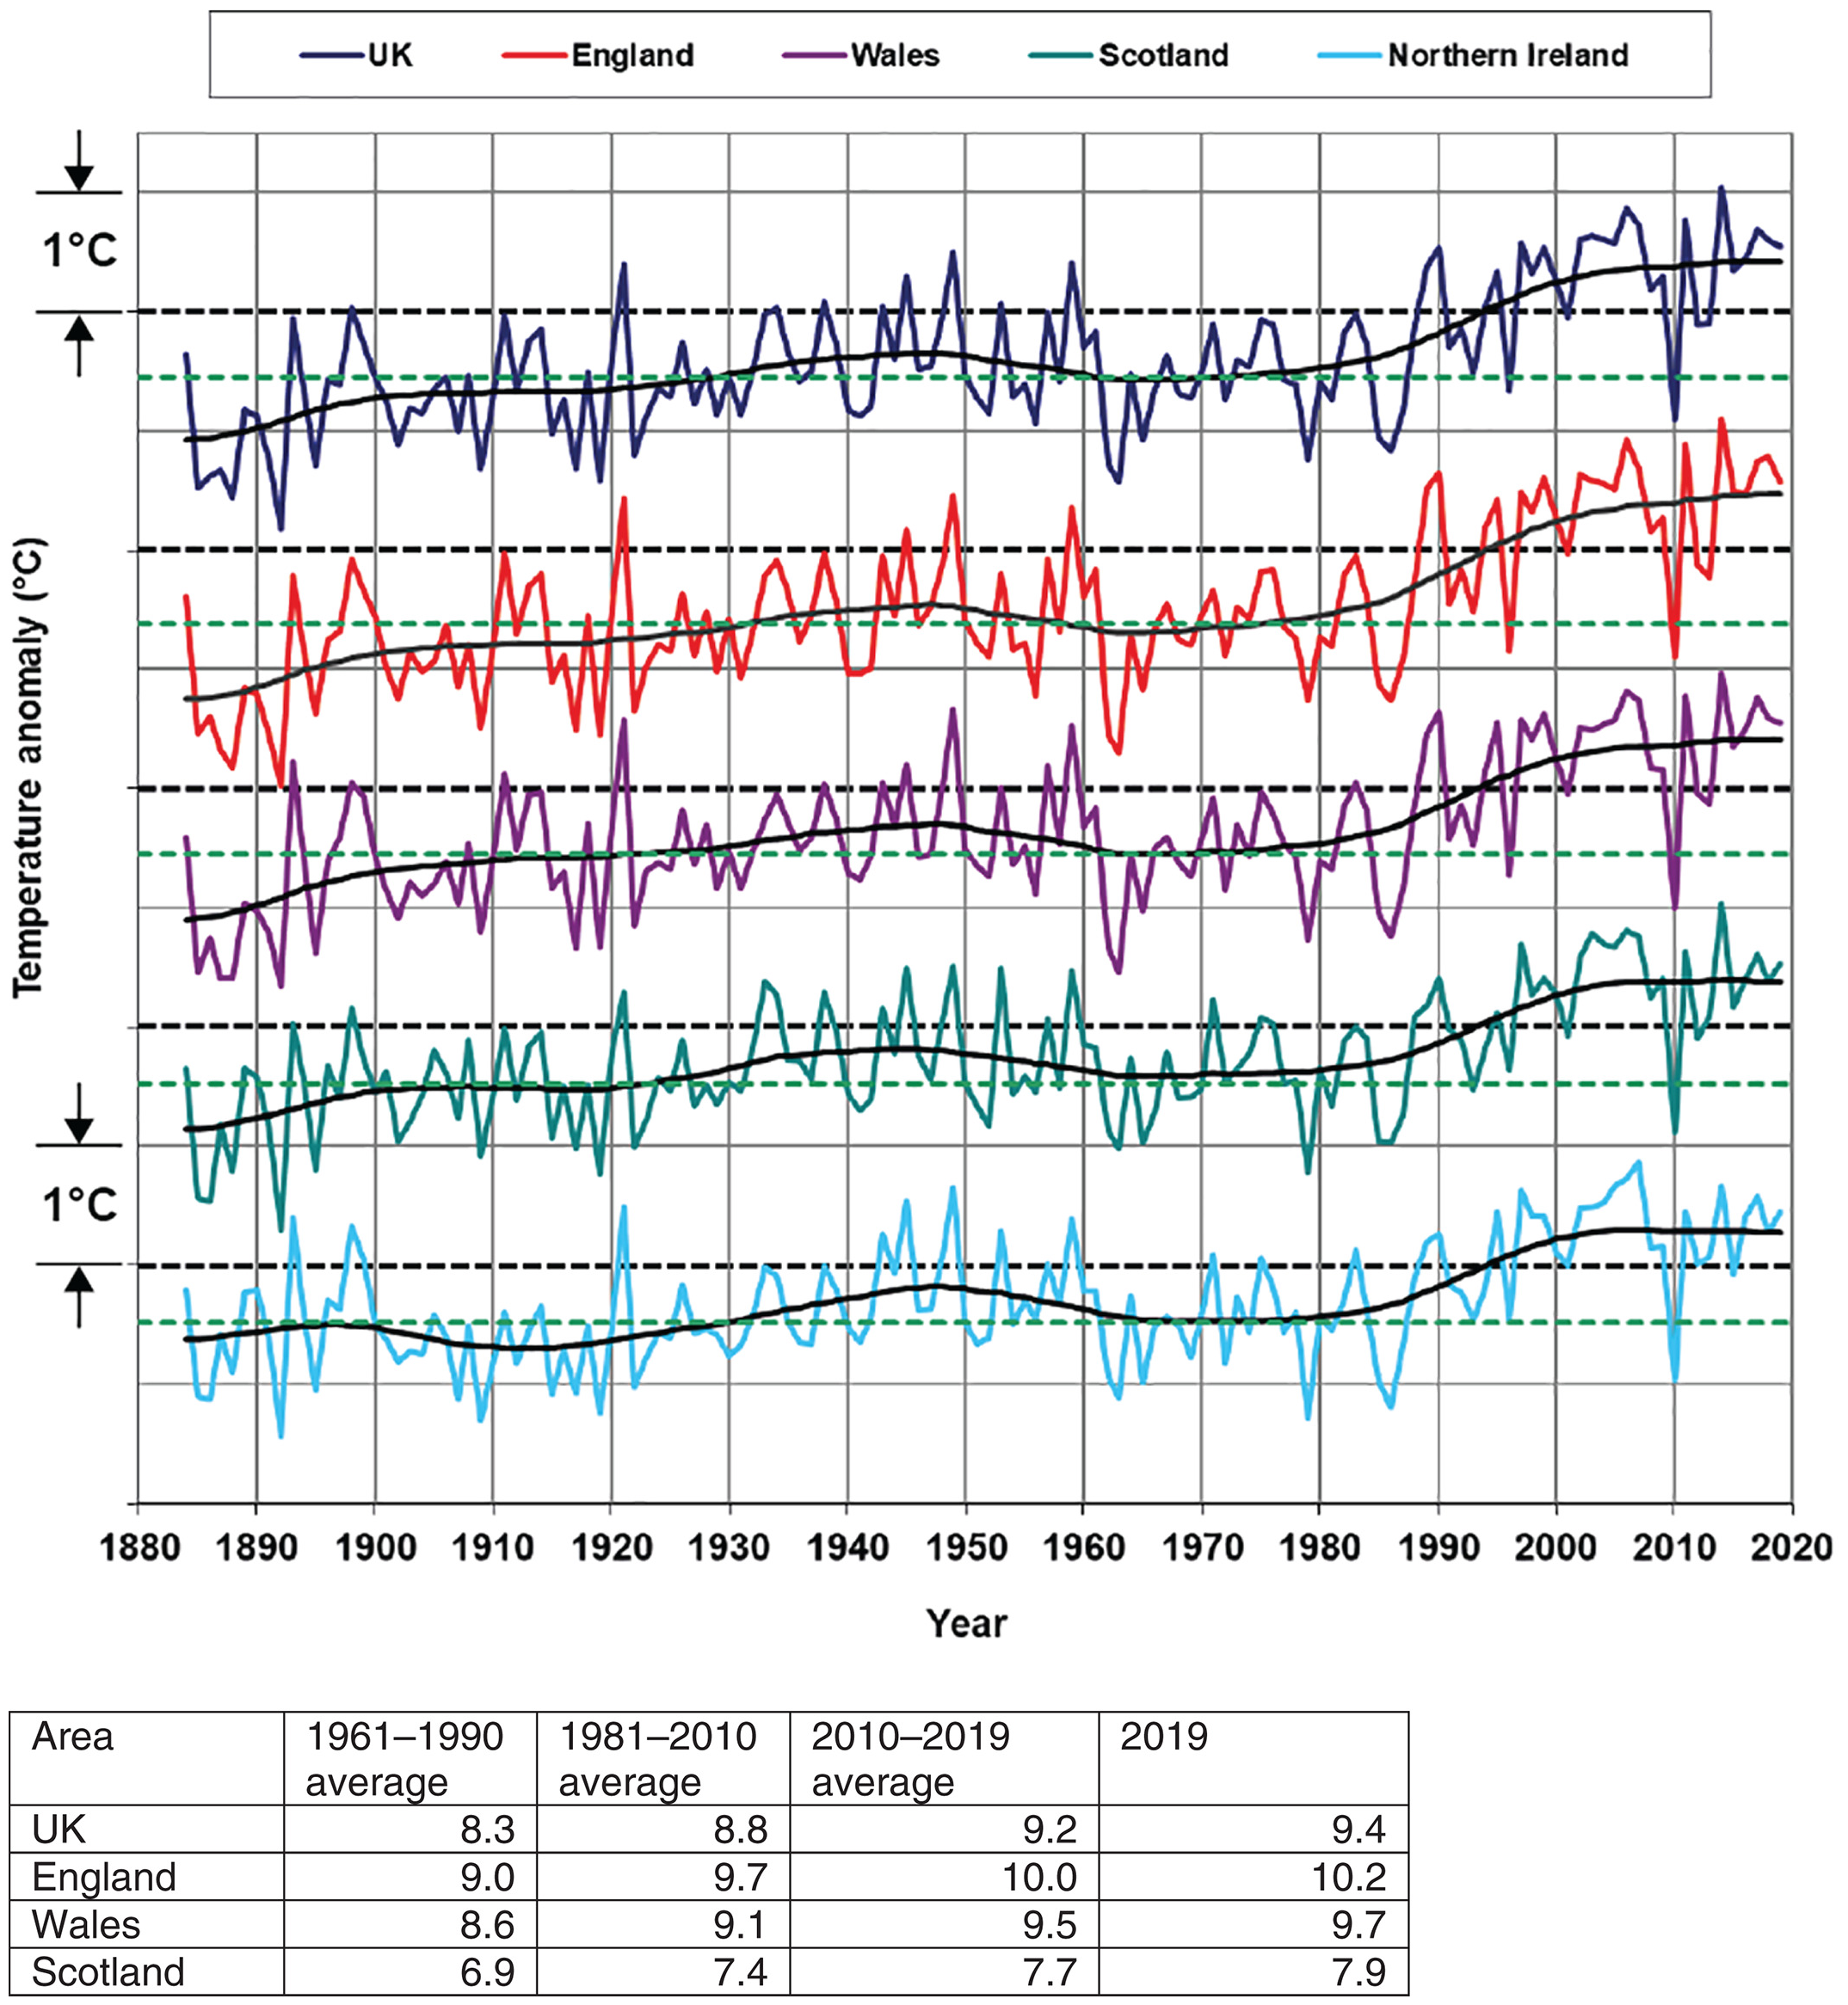 Annual T mean (°C) for the UK and countries, 1884–2019, expressed as anomalies relative to the 1981–2010 average. The hatched black line is the 1981–2010 long‐term average. The lower hatched green line is the 1961–1990 long‐term average. Light grey grid‐lines represent anomalies of ±1°C. The table provides average values (°C). Graphic: Kendon, et al., 2020 / International Journal of Climatology